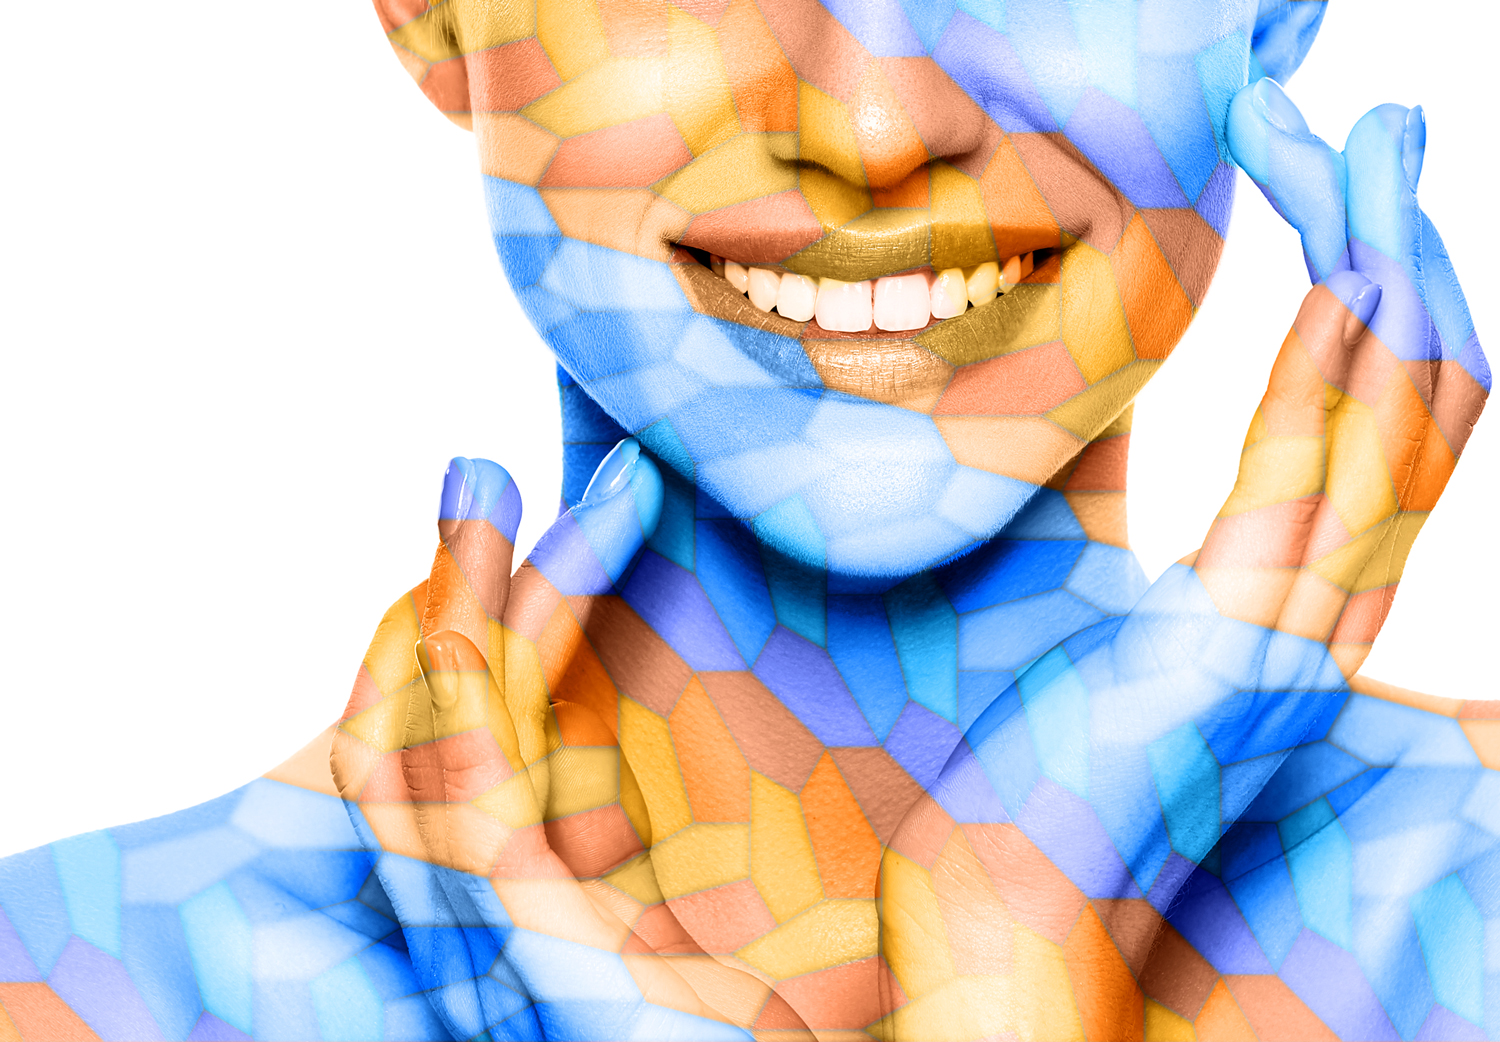 Pattern overlayed across a model's face and hands